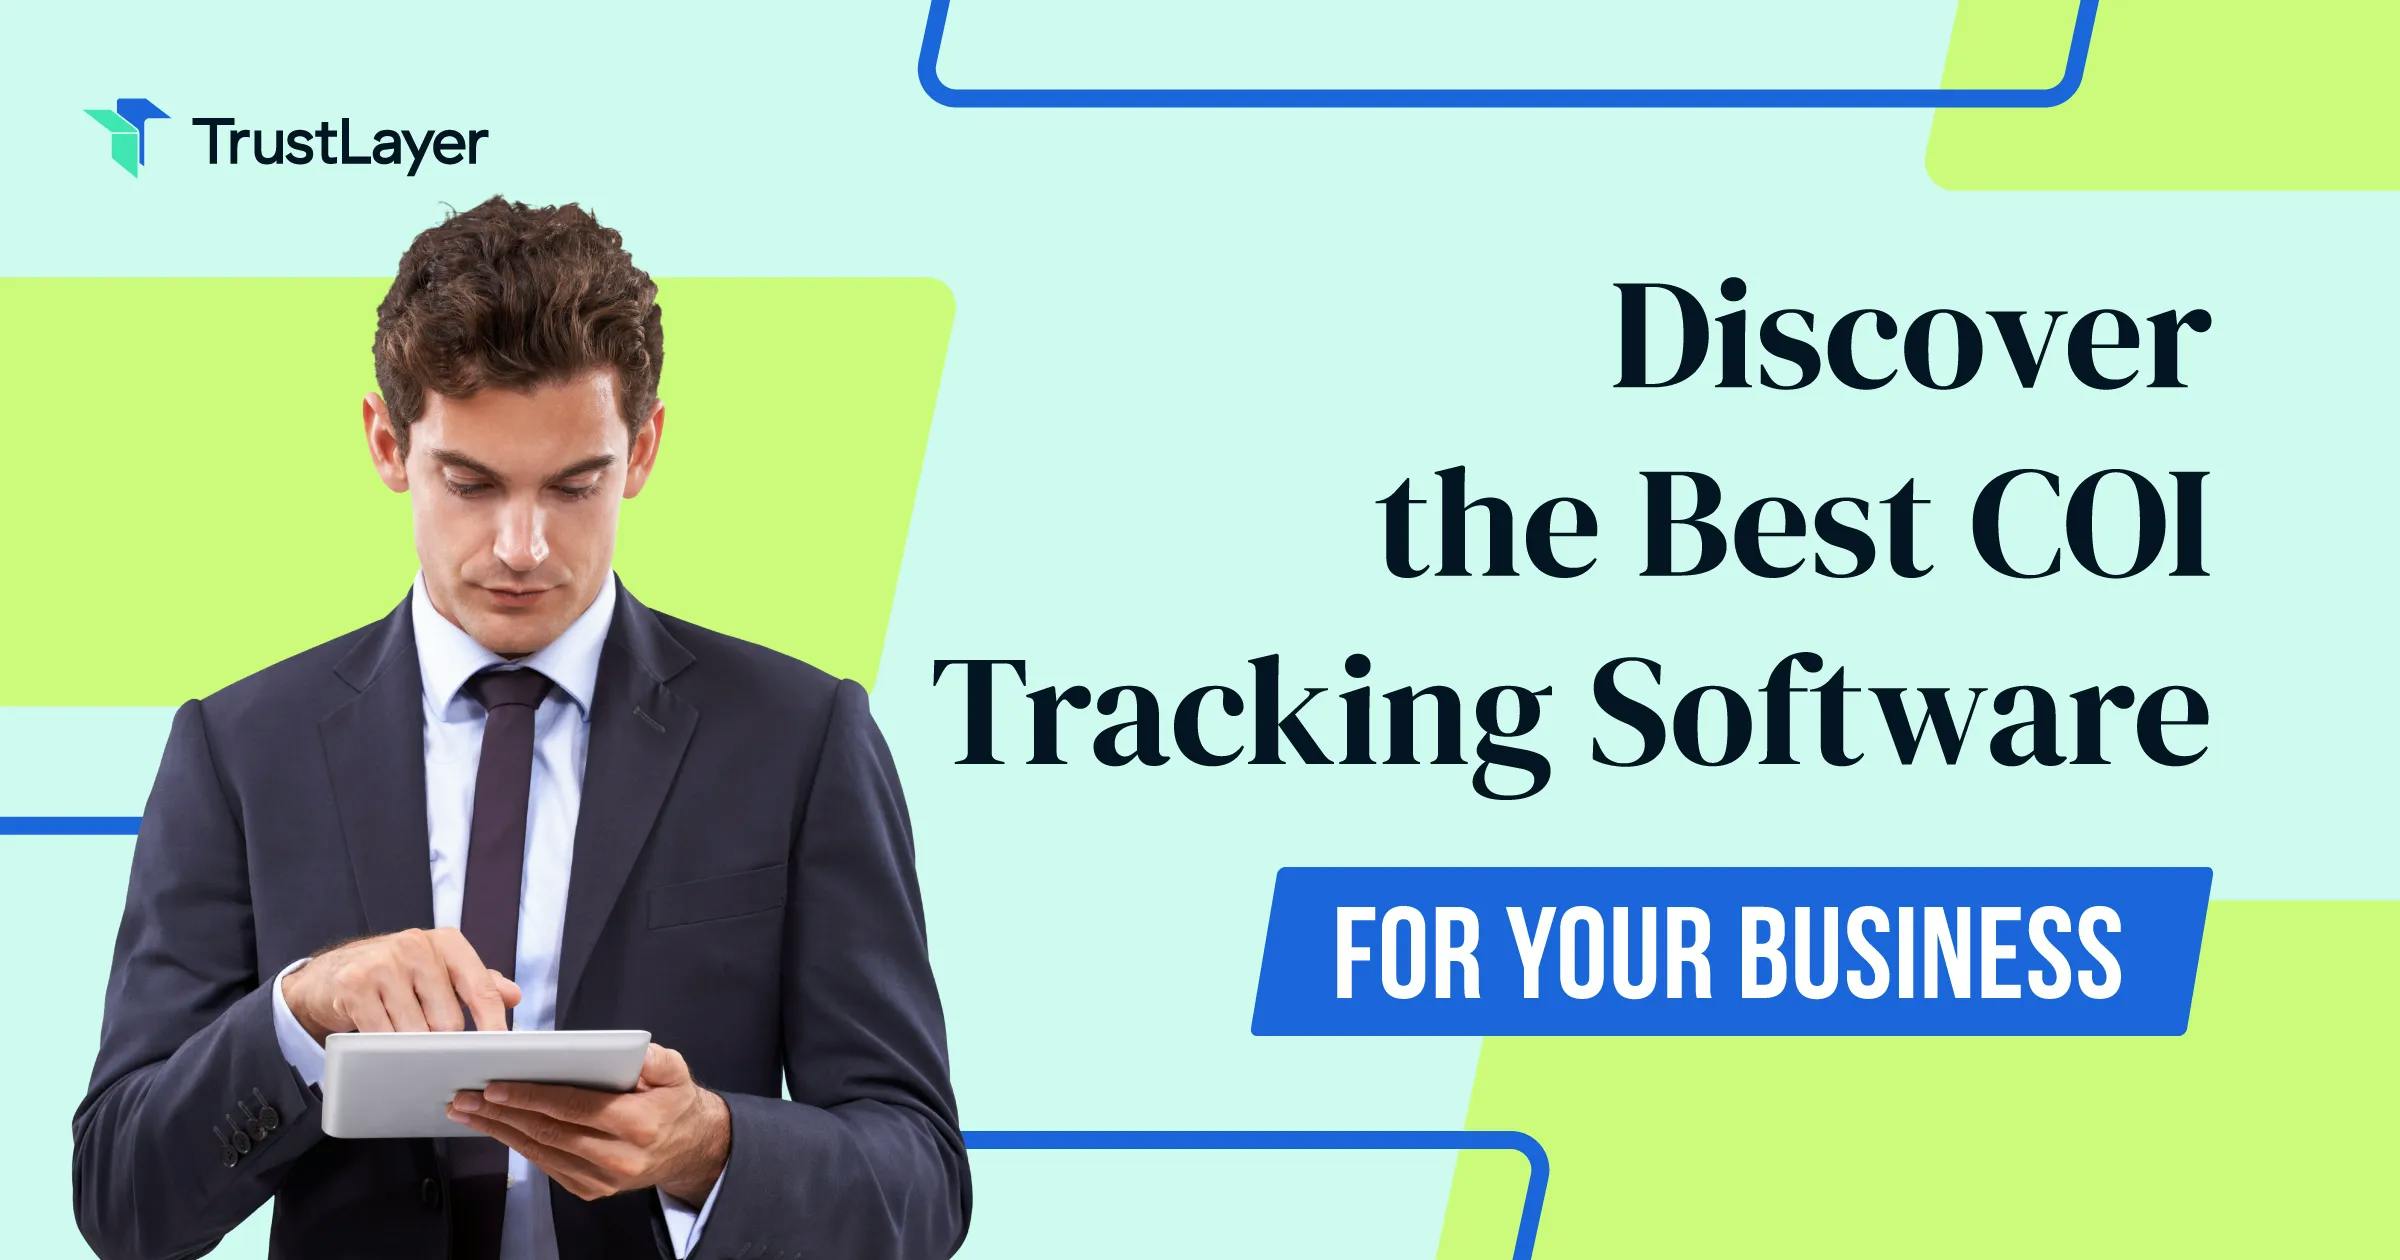 Discover the Best COI Tracking Software for Your Business